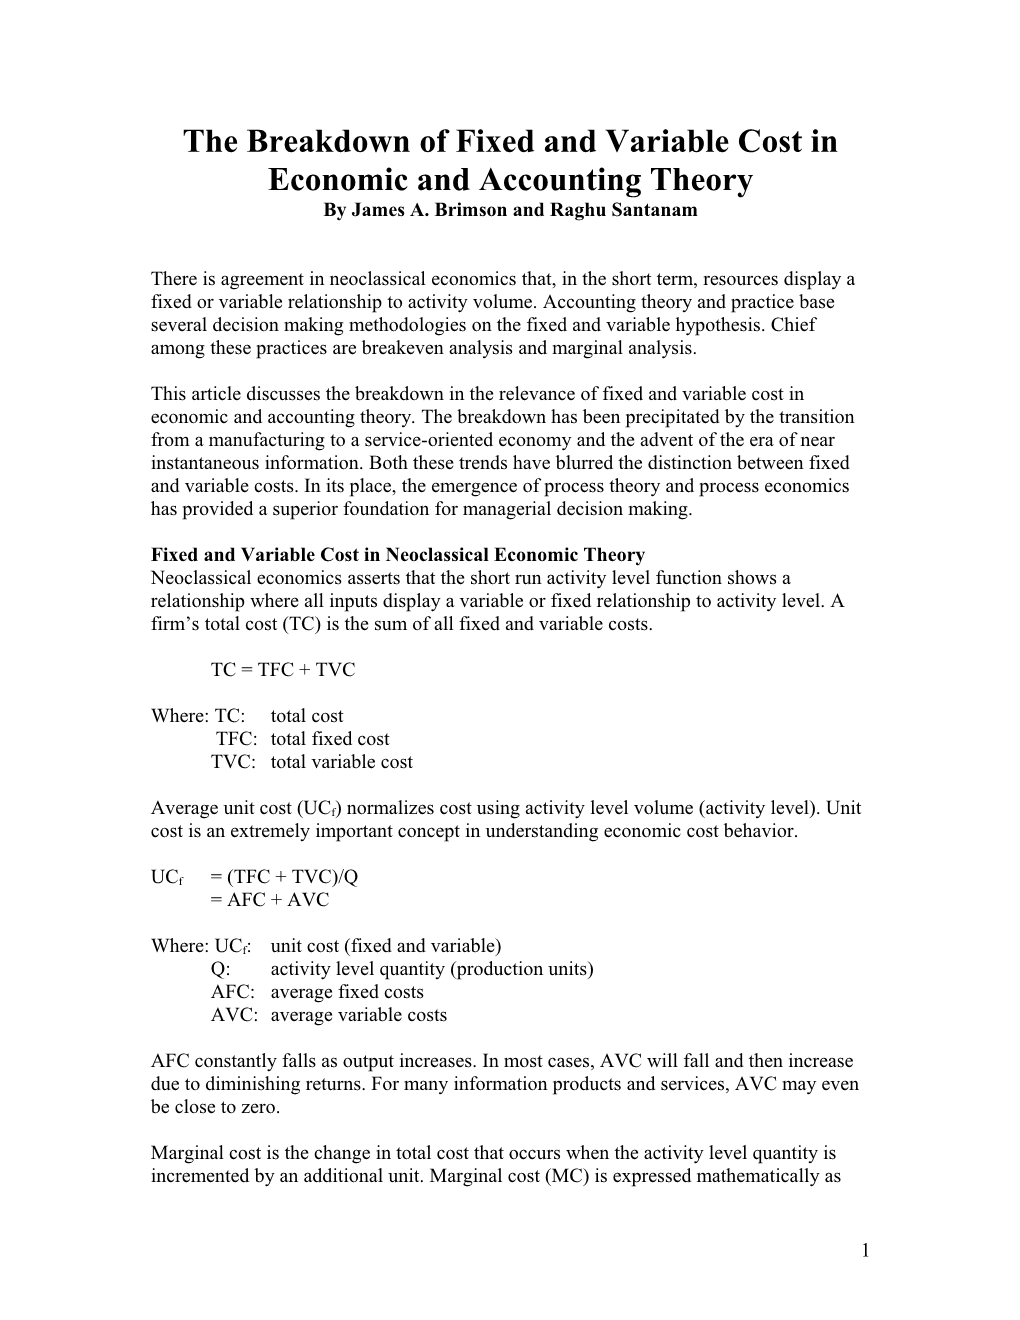 The Breakdown of Fixed and Variable Cost in Economic and Accounting Theory